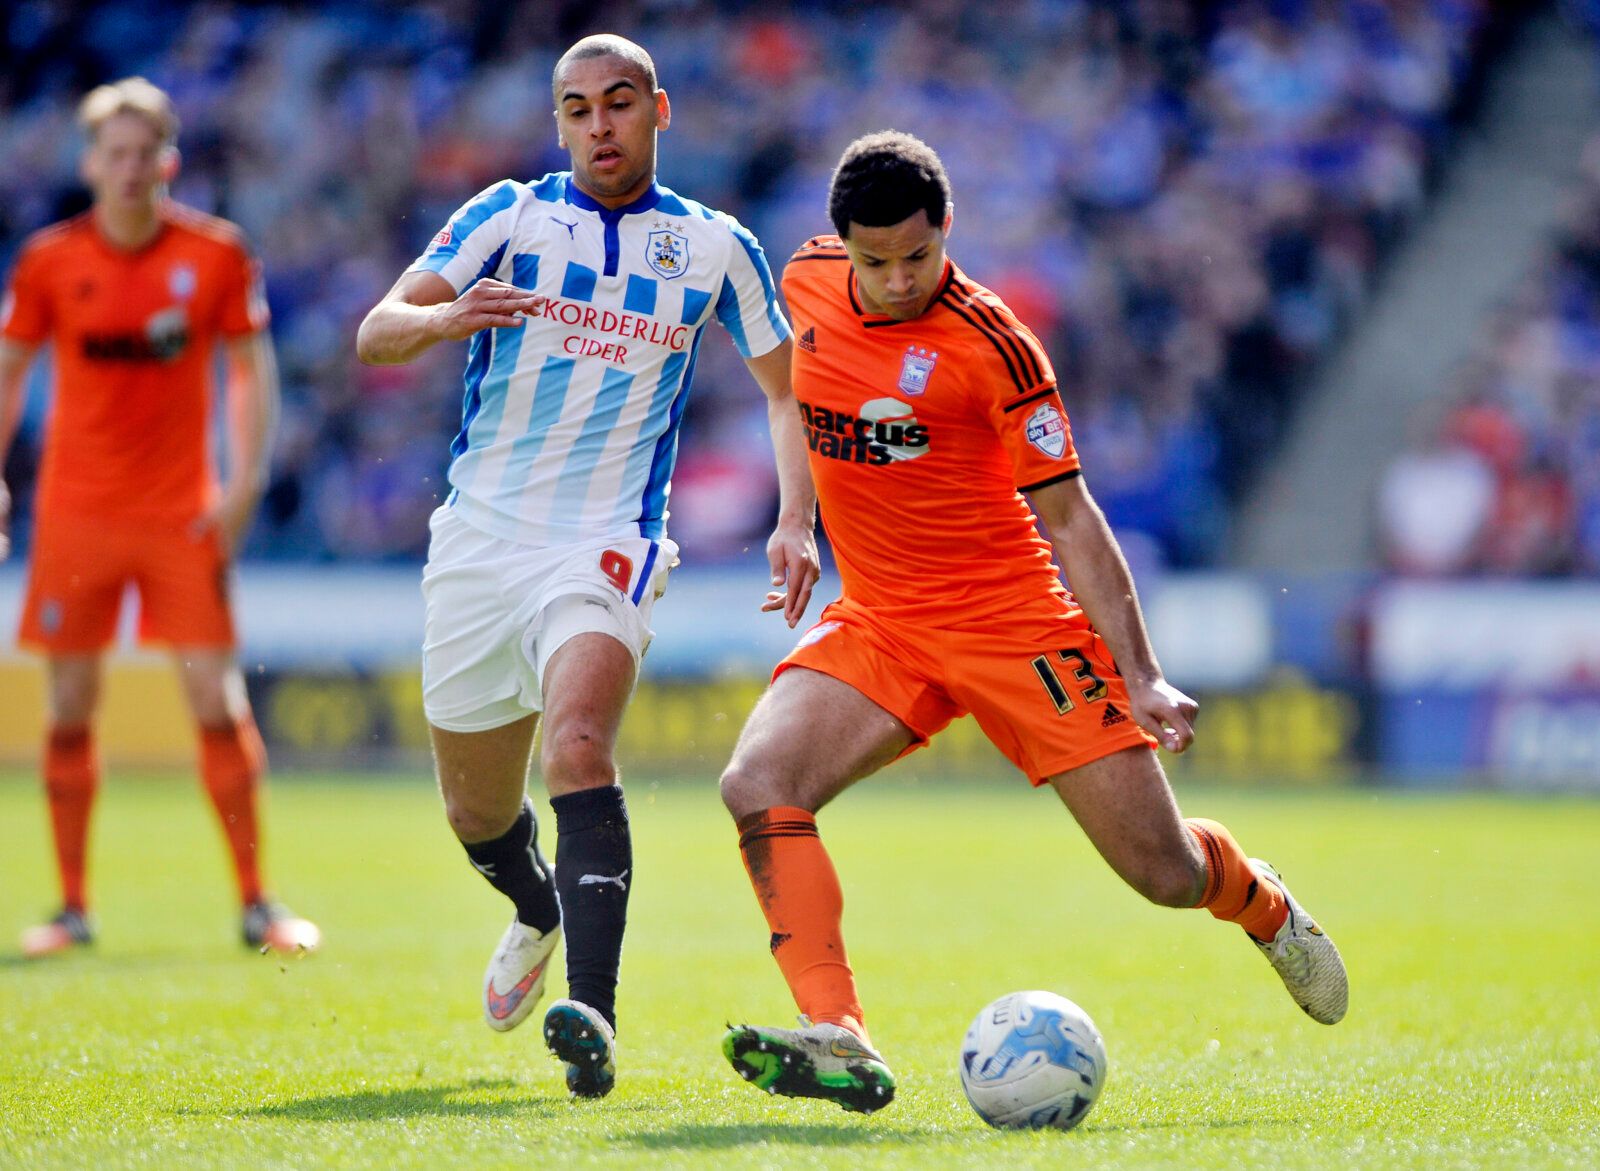 Football - Huddersfield Town v Ipswich Town - Sky Bet Football League Championship - John Smith's Stadium - 6/4/15 
Ipswich Town's Zeki Fryers (R) in action with Huddersfield Town's James Vaughan 
Mandatory Credit: Action Images / Adam Holt 
Livepic 
EDITORIAL USE ONLY. No use with unauthorized audio, video, data, fixture lists, club/league logos or 